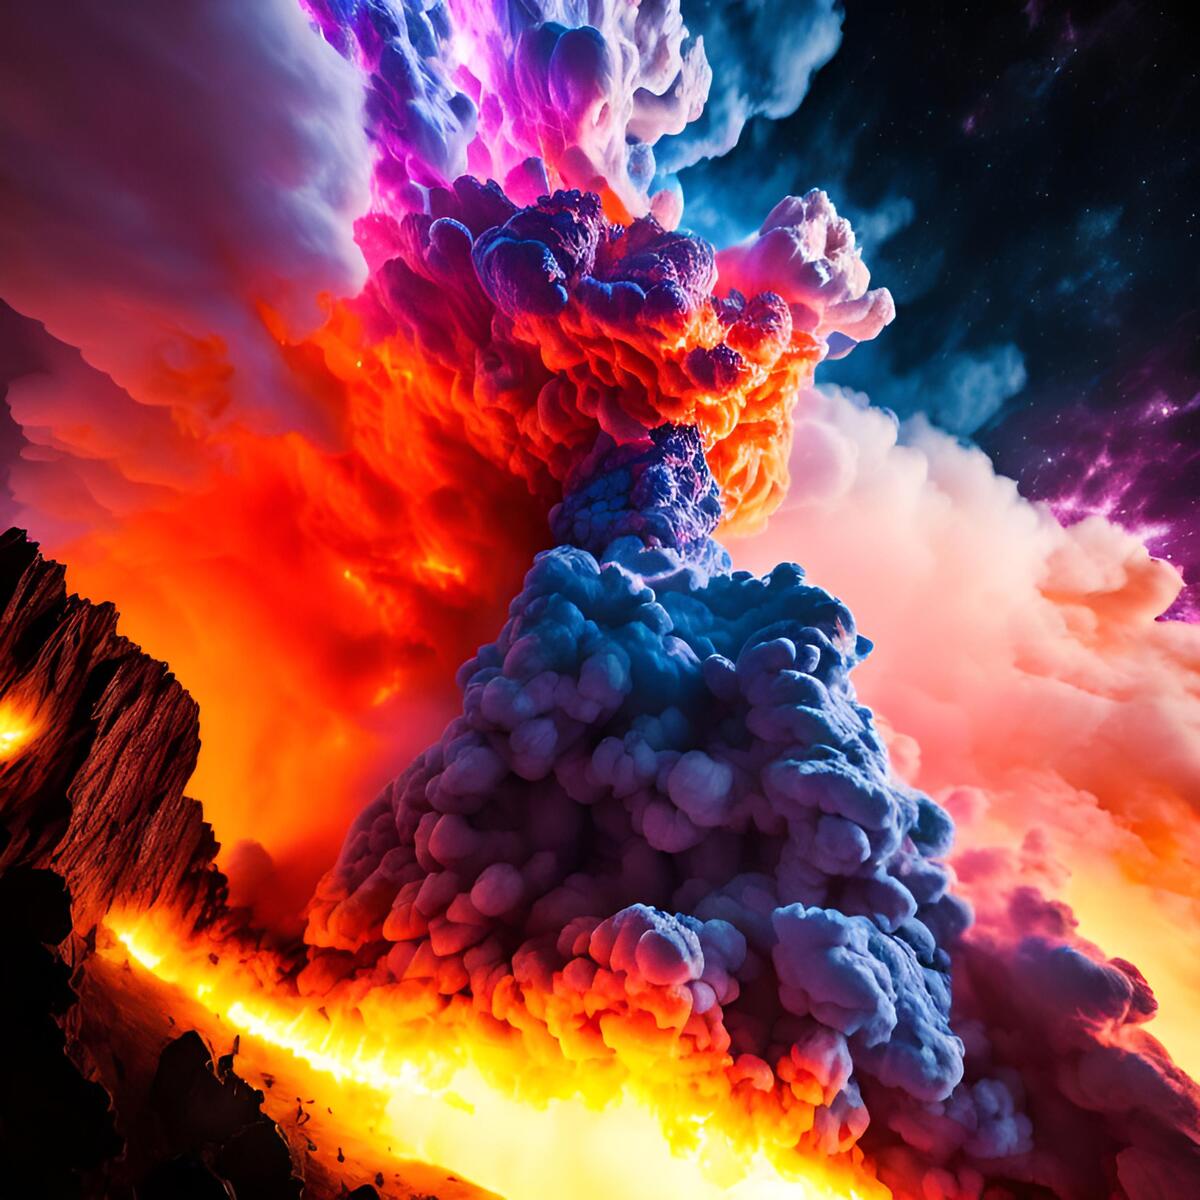 Lava flowing down the slope of the volcano with multicolored smoke